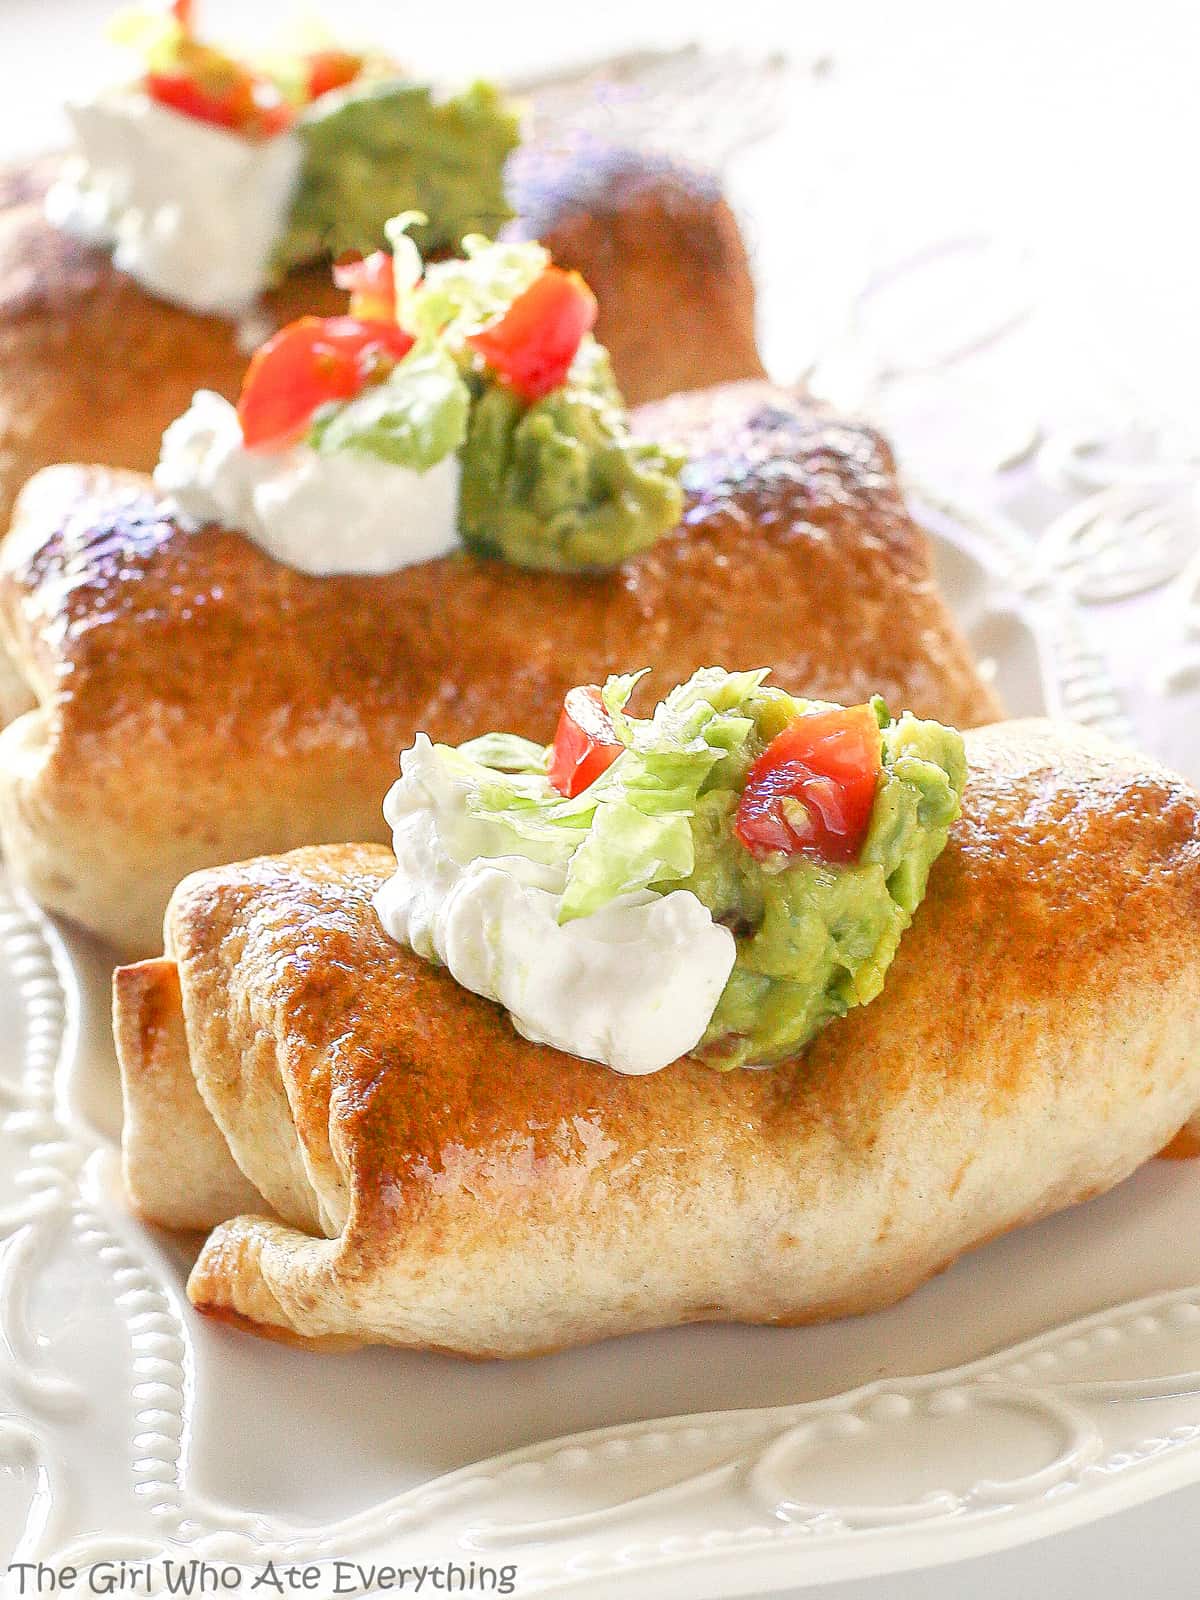 Baked Chicken Chimichangas Recipe - The Girl Who Ate Everything